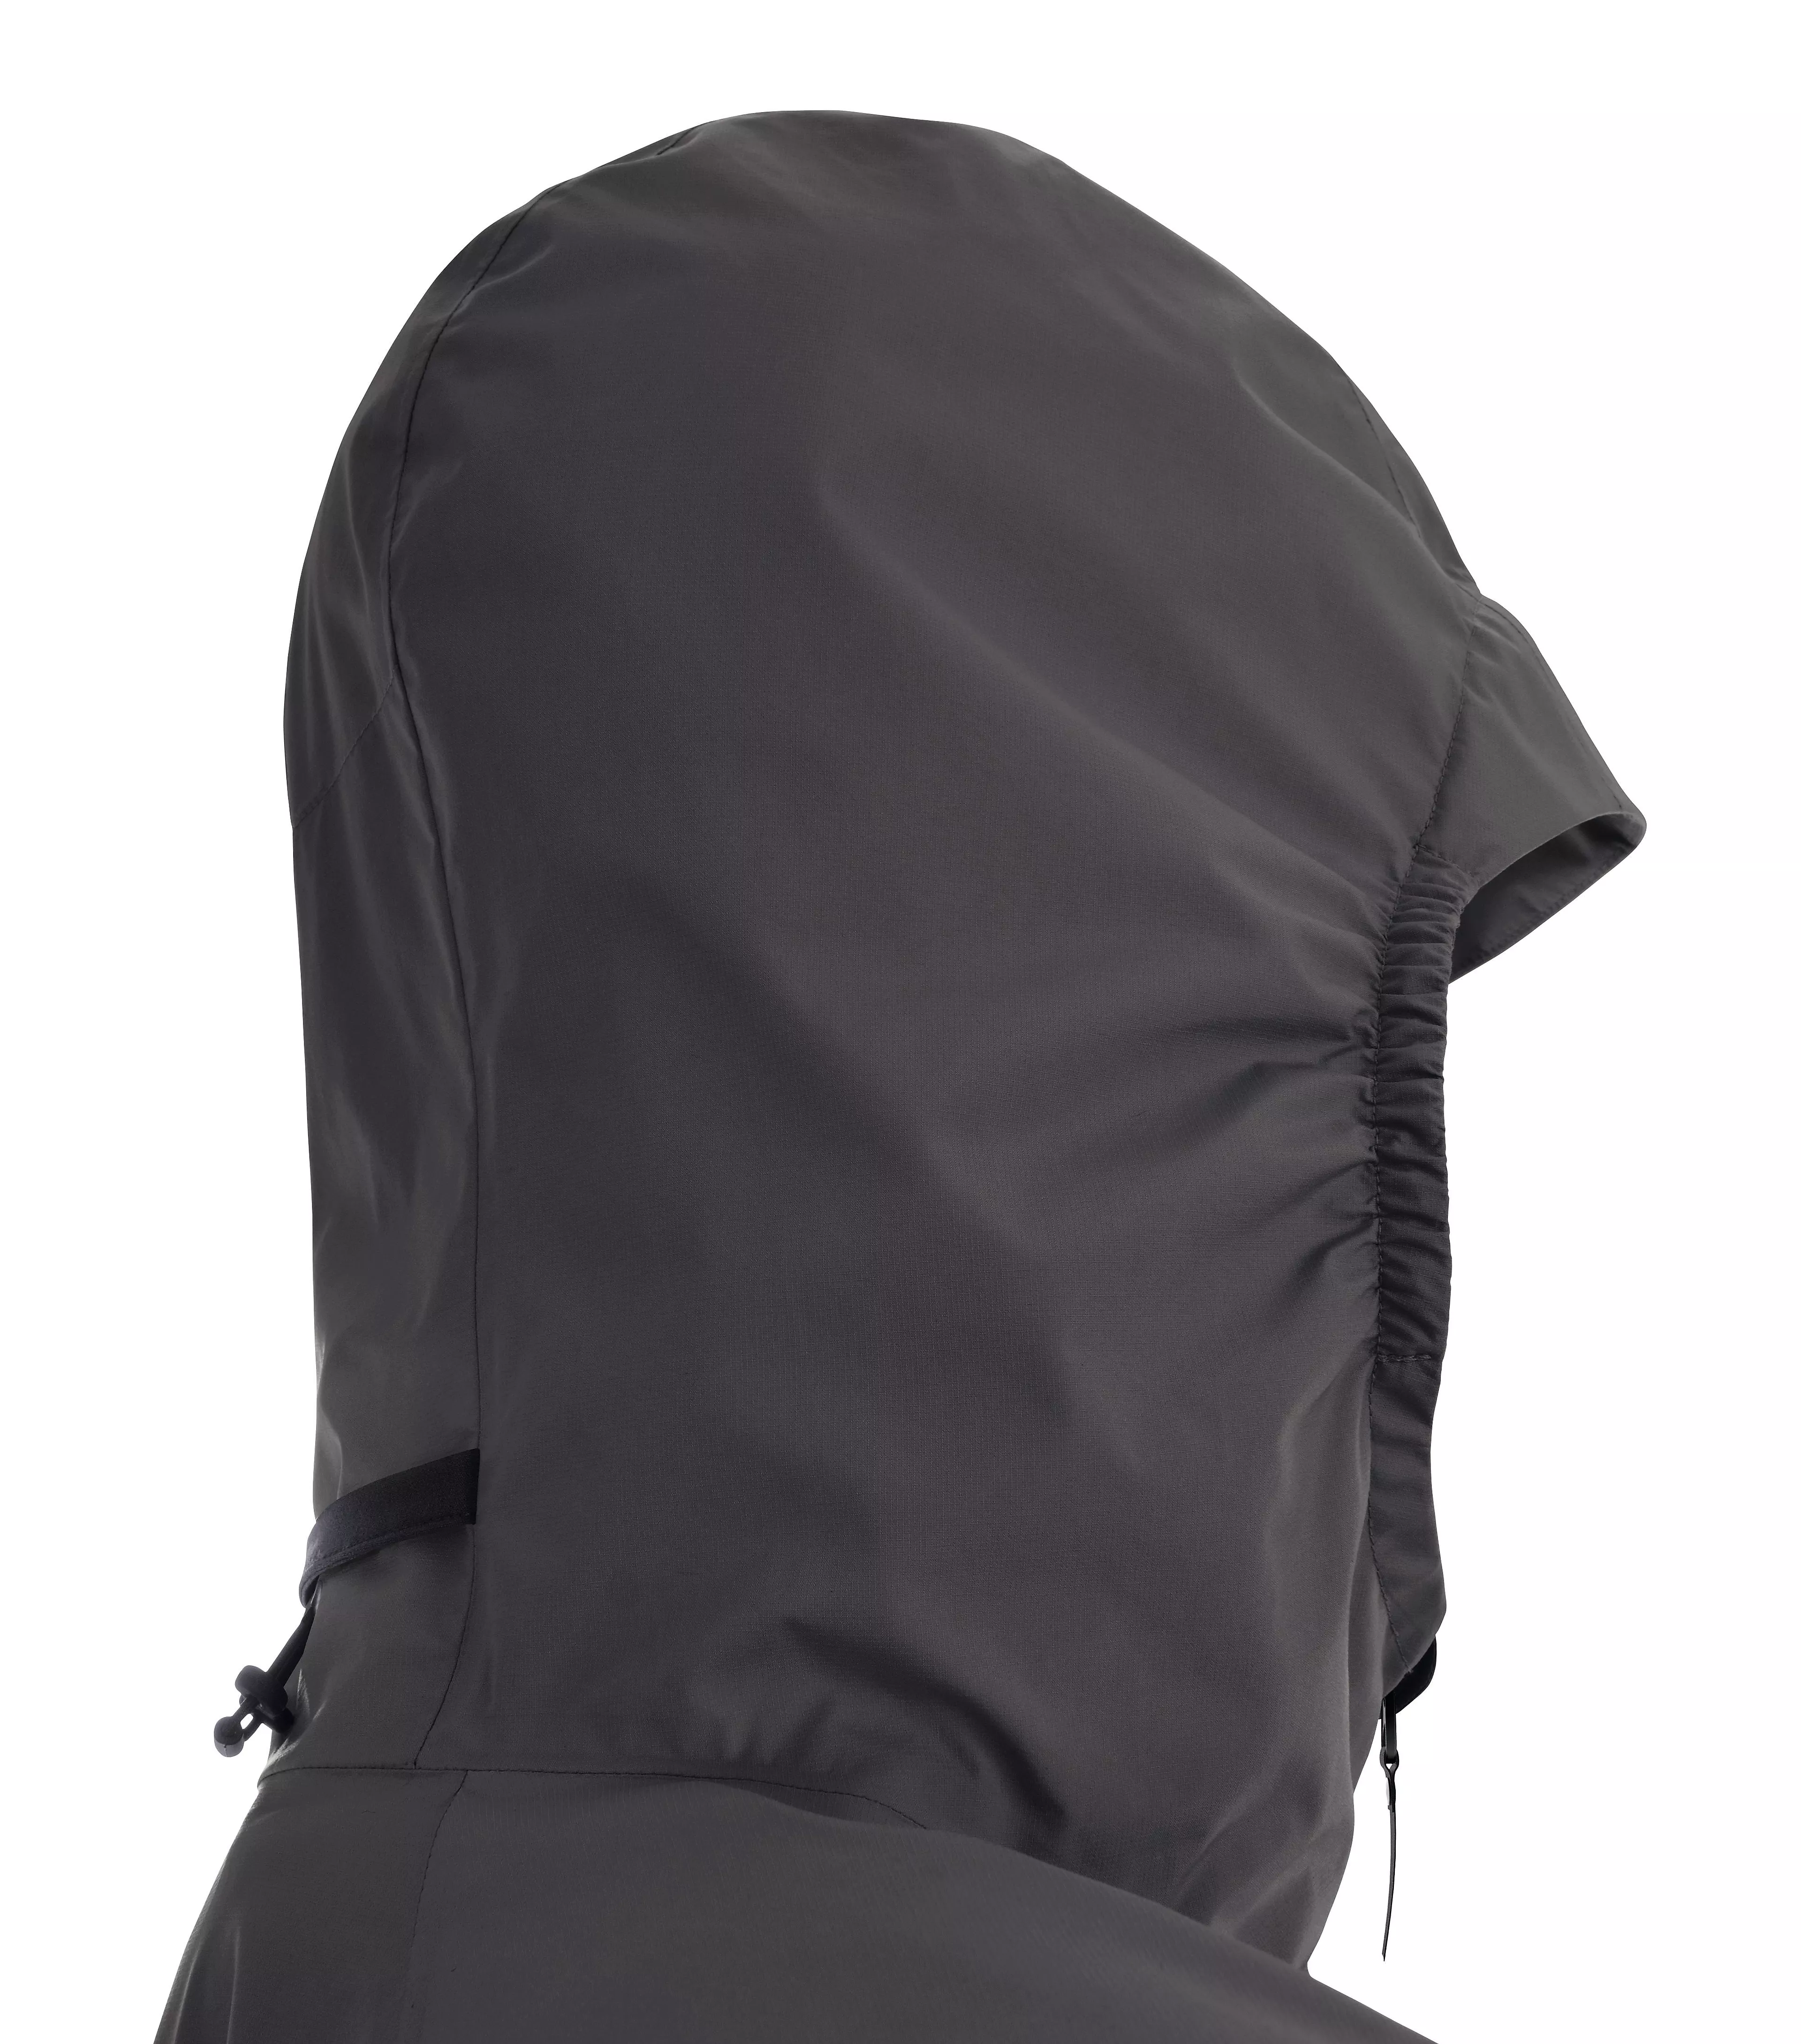 Partial GTX Hooded Jacket